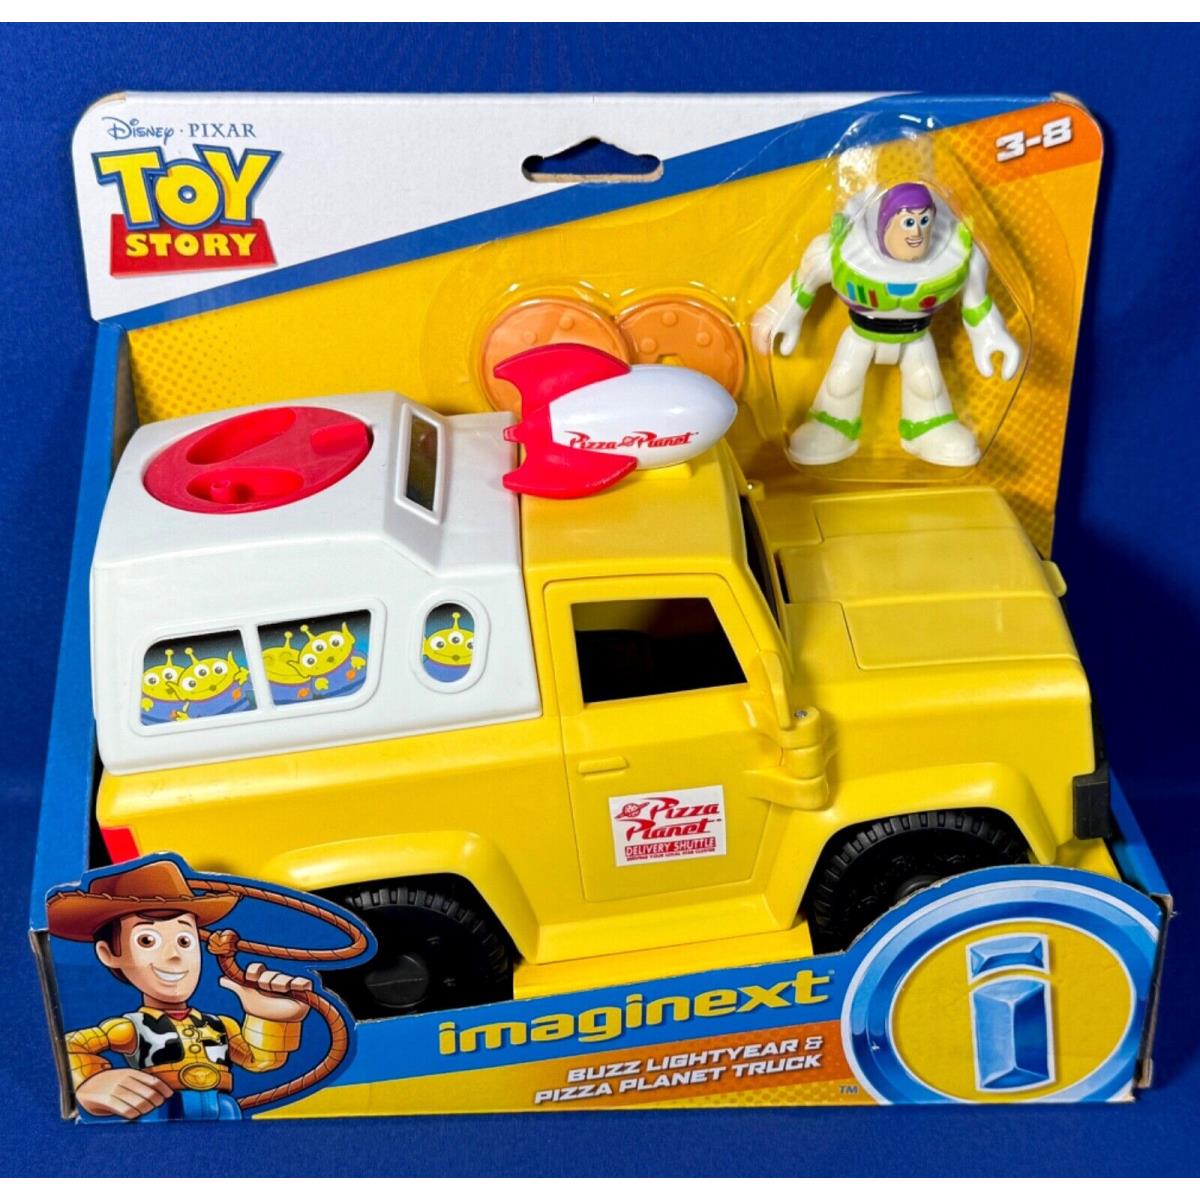 Pizza Planet Truck with Buzz Lightyear Toy Story Imaginext Pizza Launcher